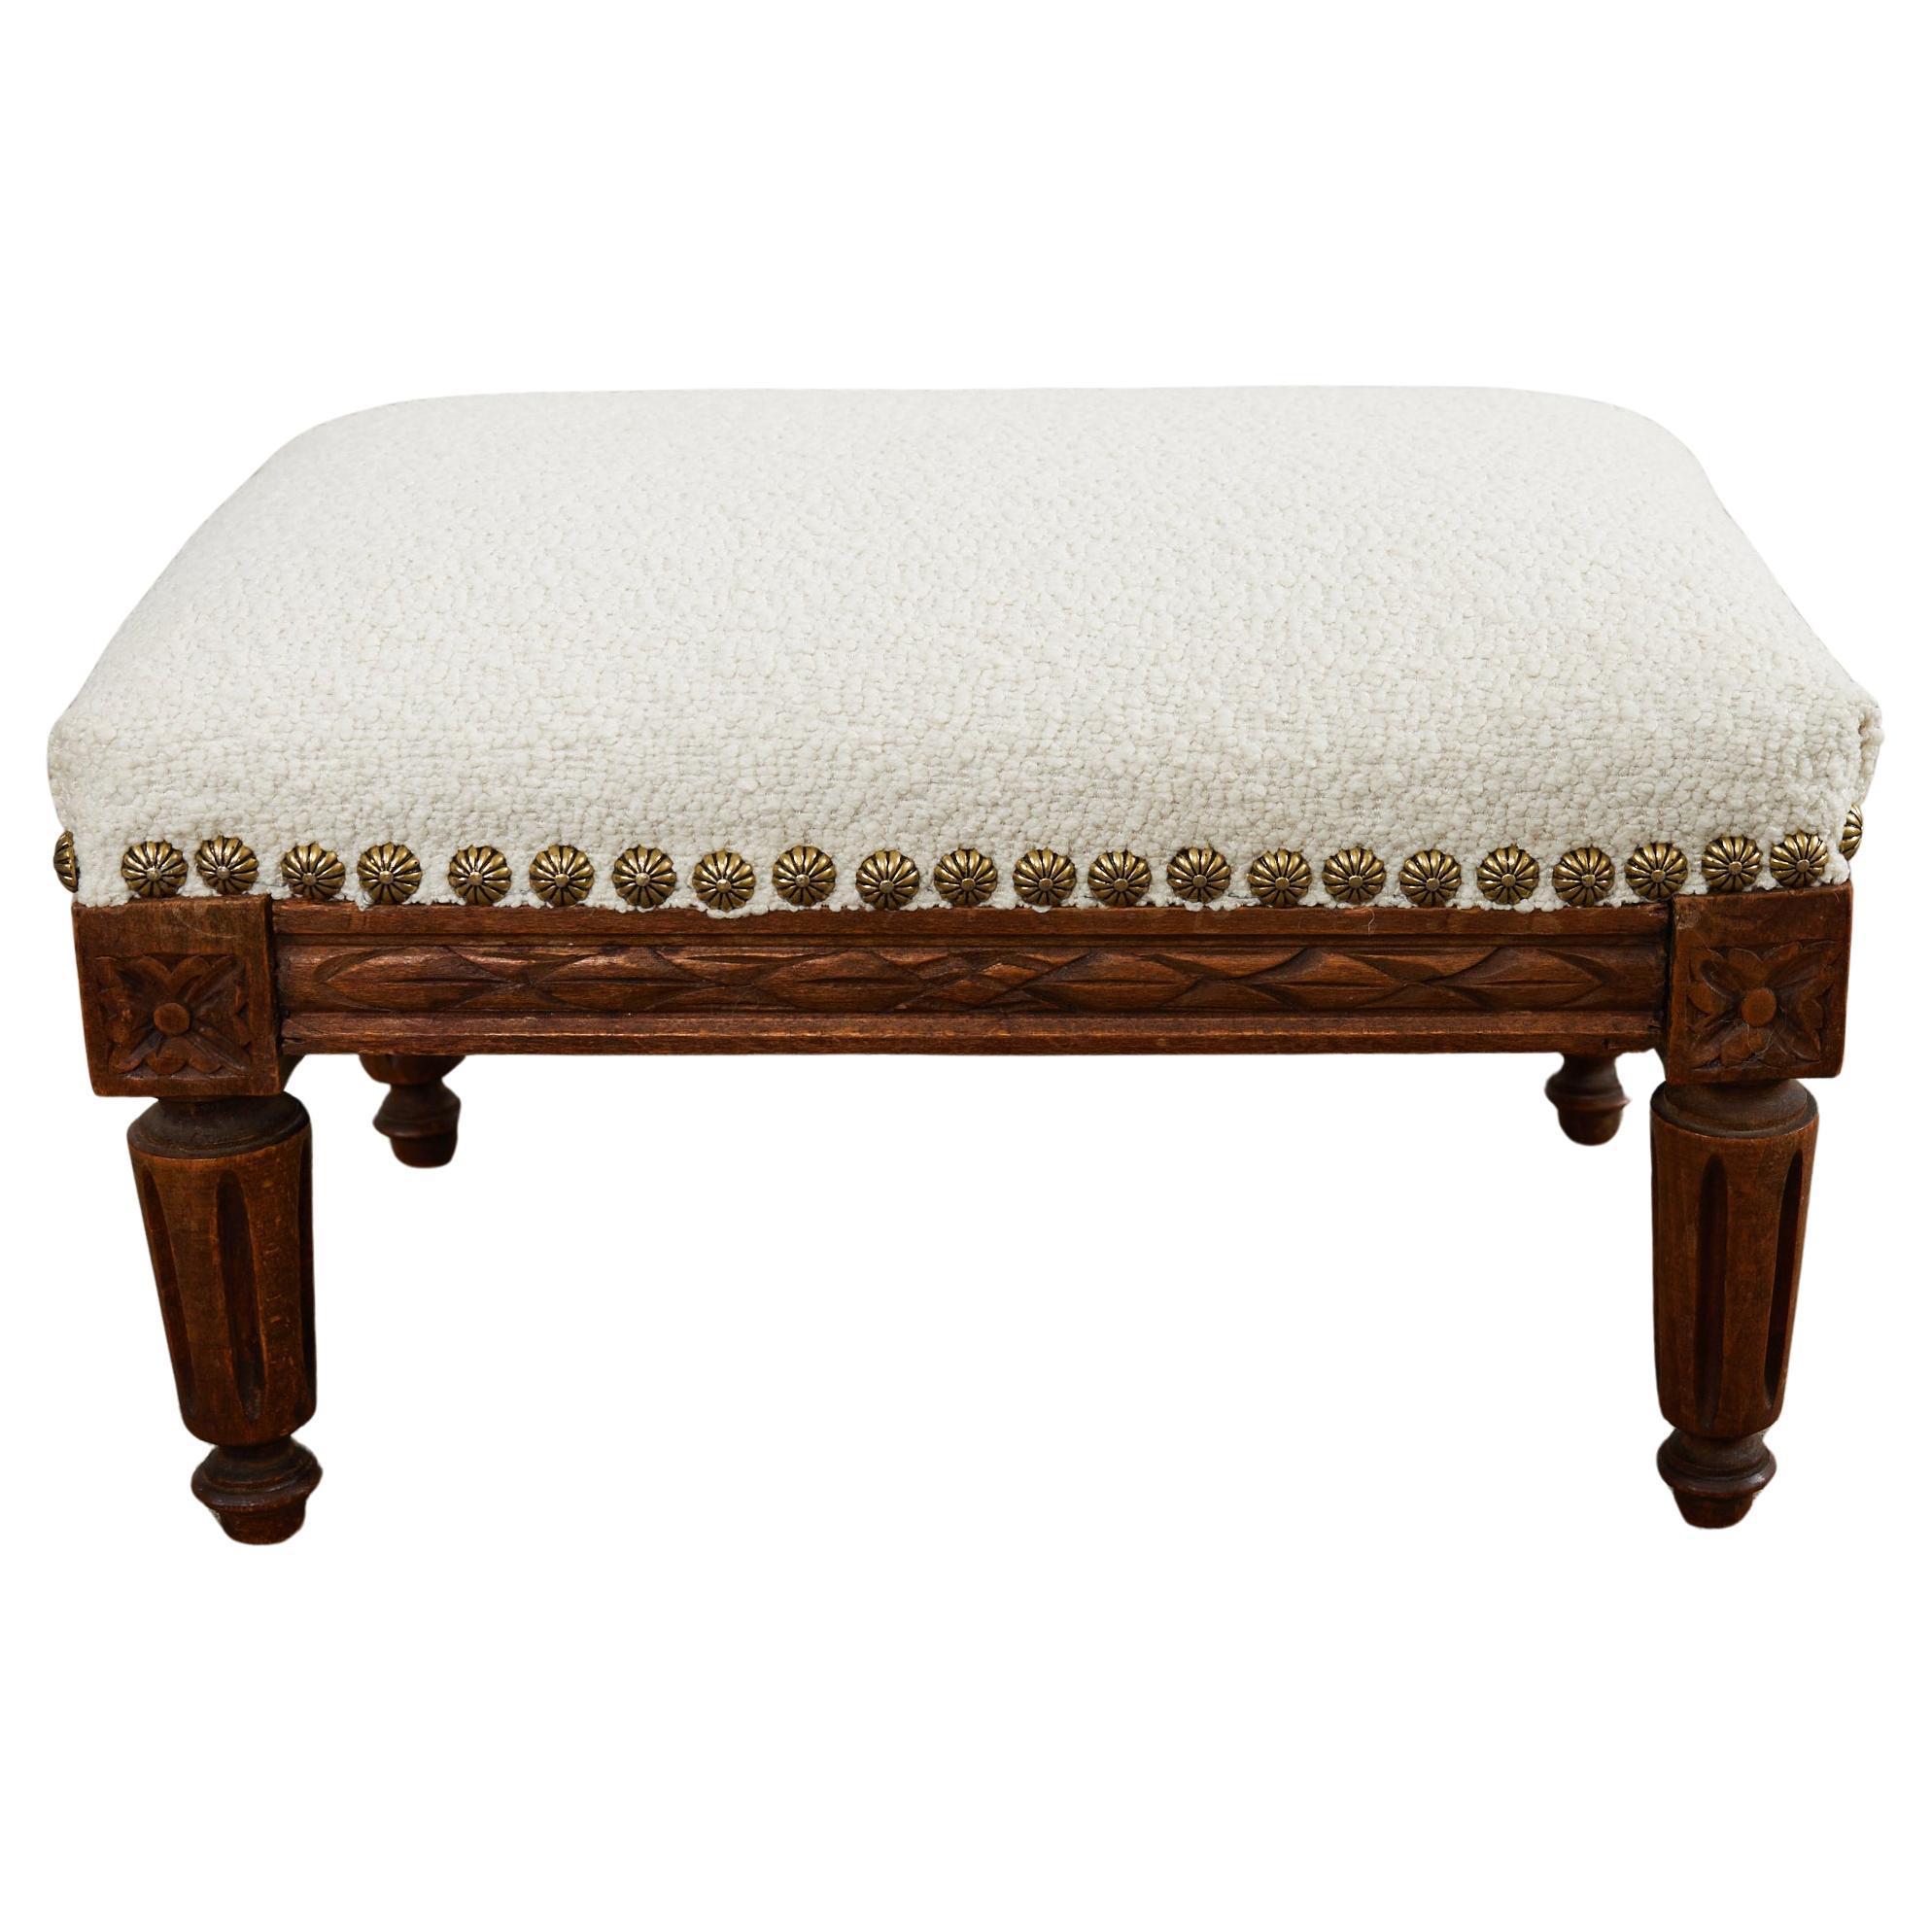 Dutch Louis XVI Style Diminutive Footstool with Boucle